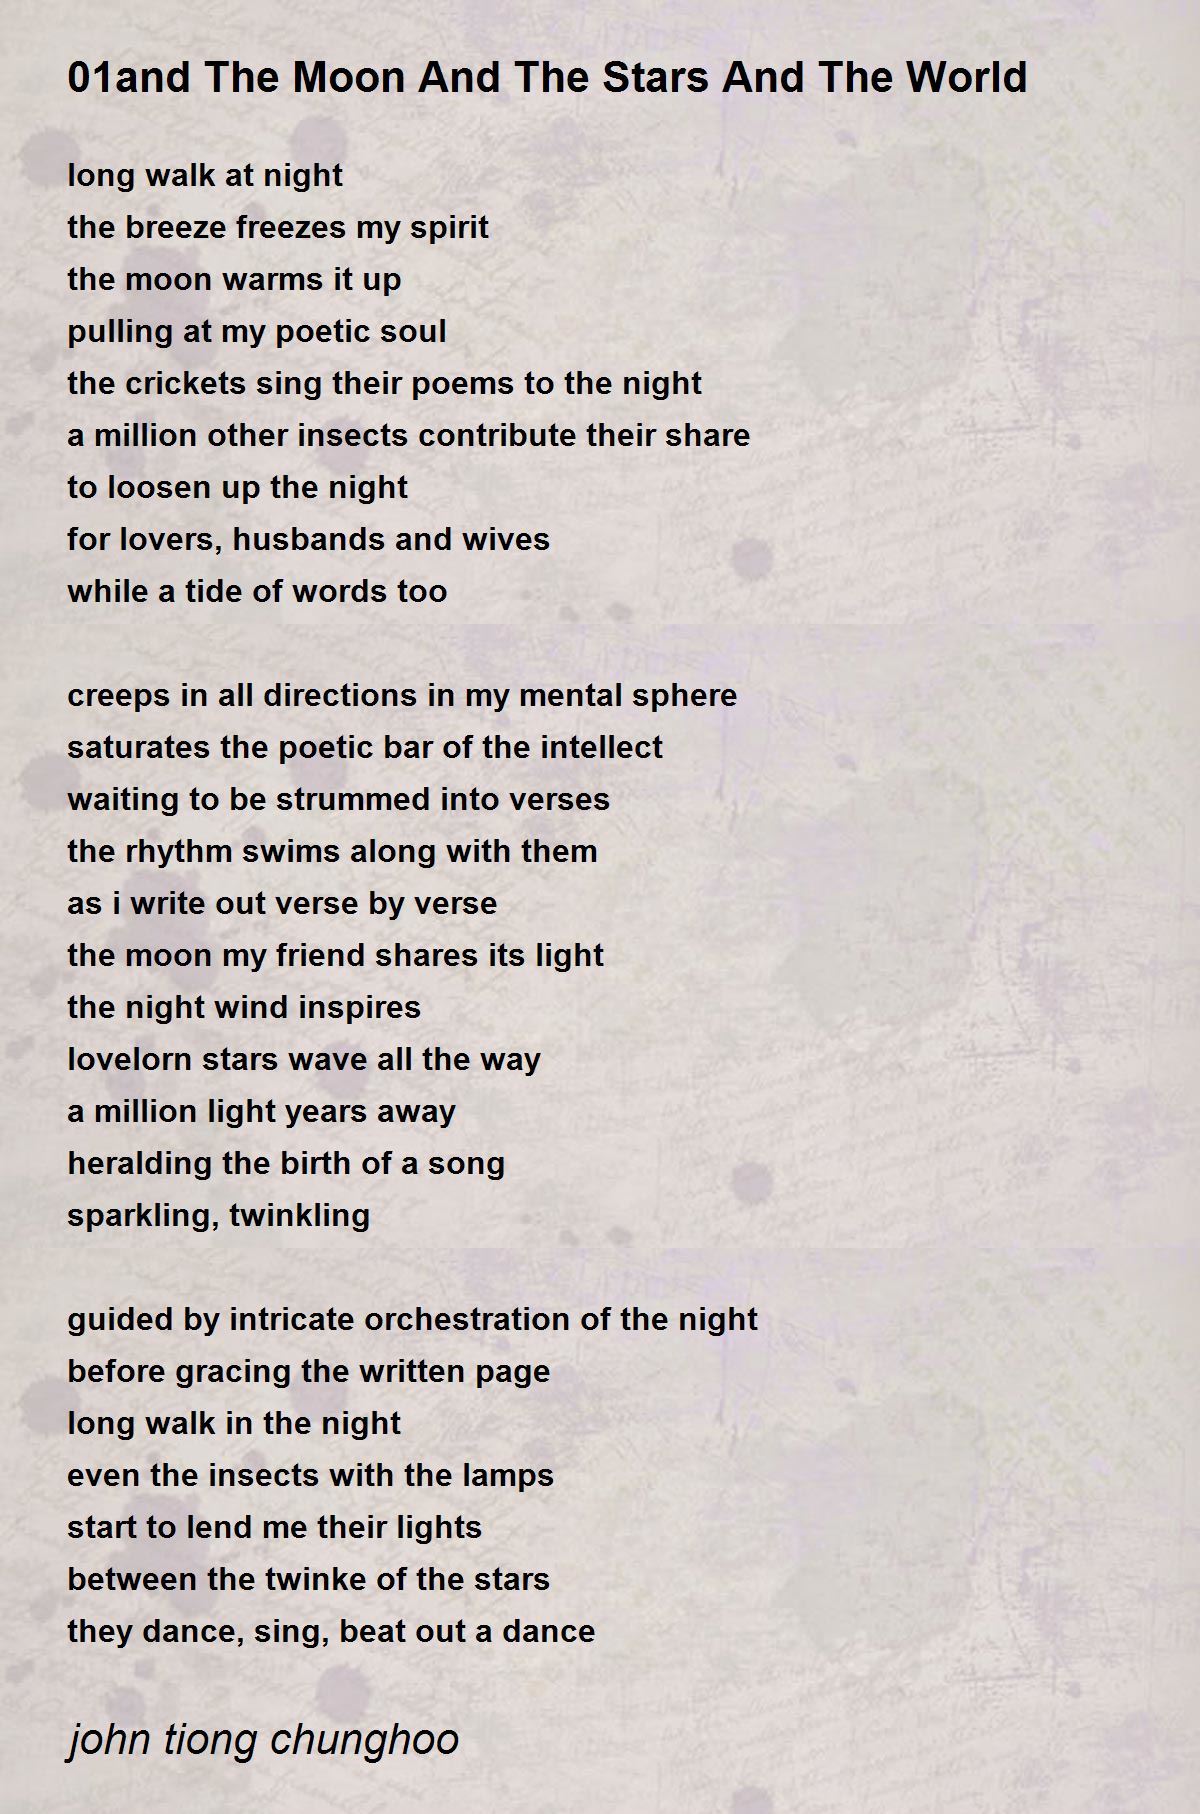 01 And The Moon And The Stars And The World Poem by john tiong chunghoo